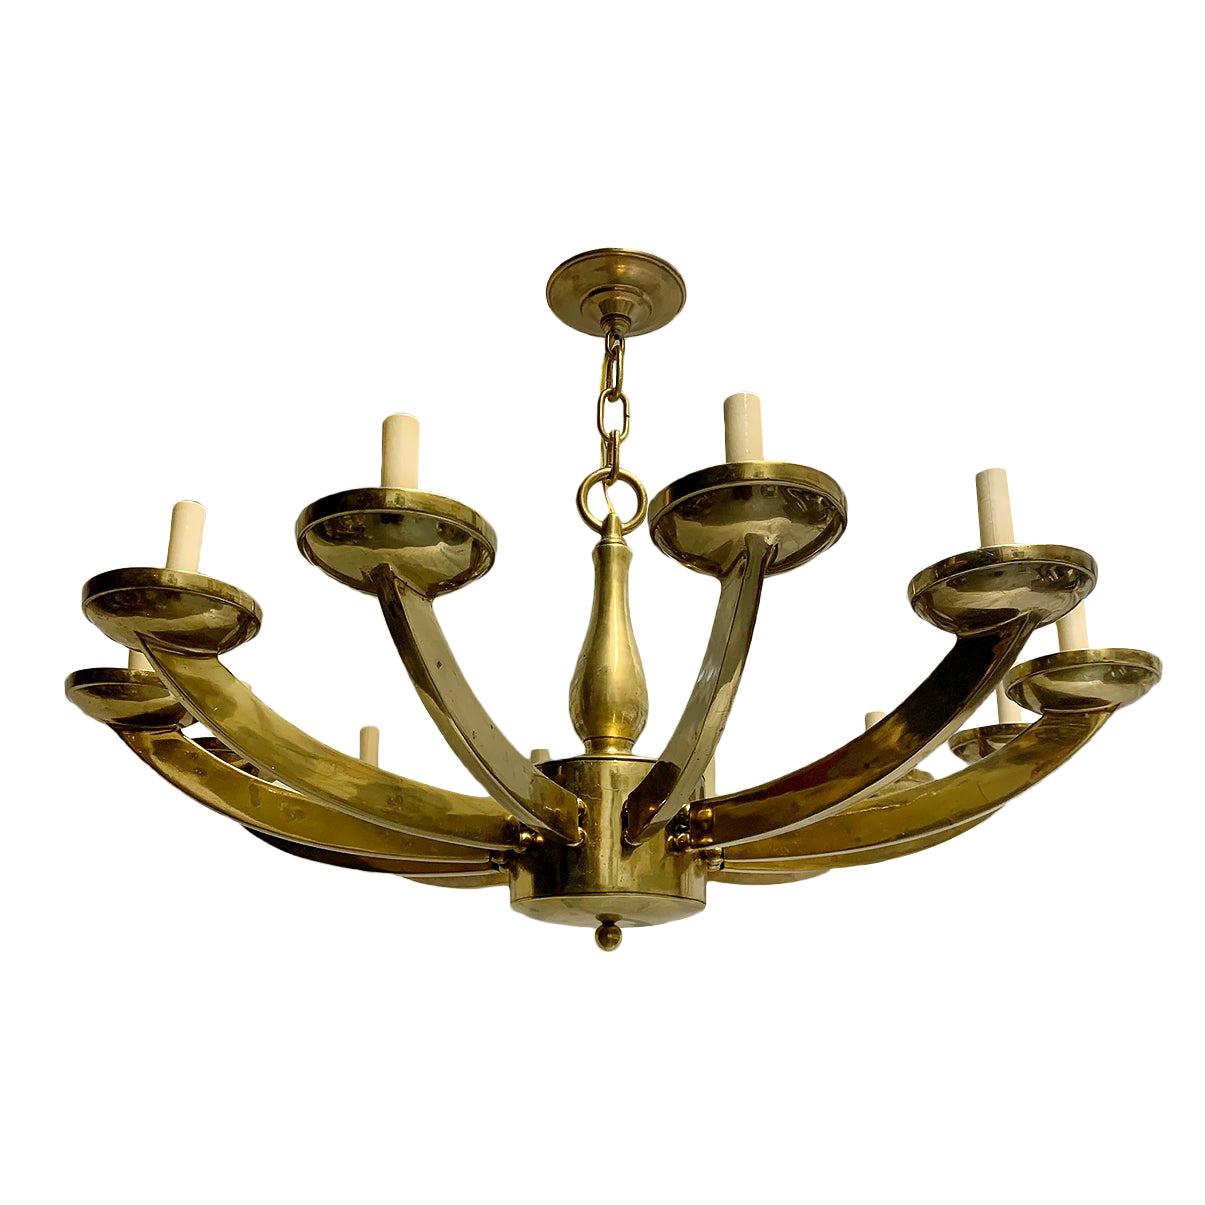 Pair of Large Moderne Bronze Chandeliers, Sold Individually